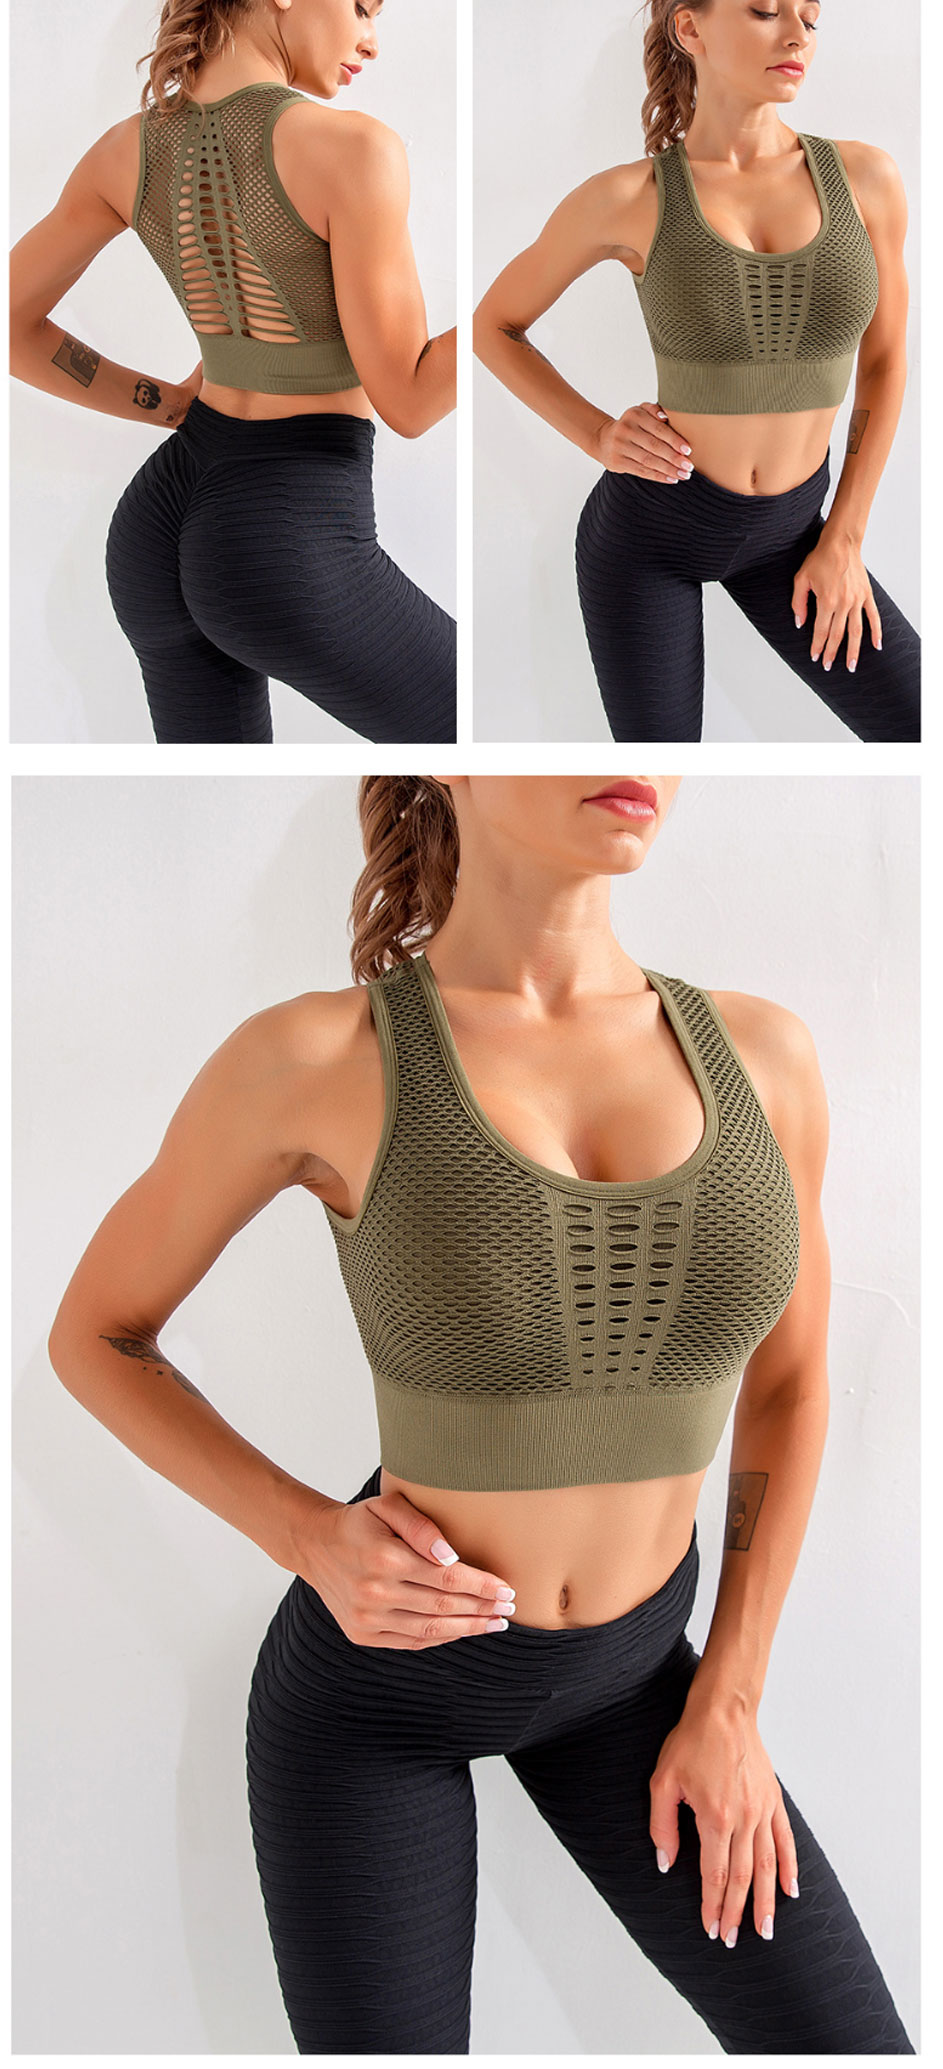 2020-New-Womens-High-Impact-Beautiful-Back-Bra-Seamless-Breathable-Sports-Yoga-Running-Fitness-Under-4000321533632